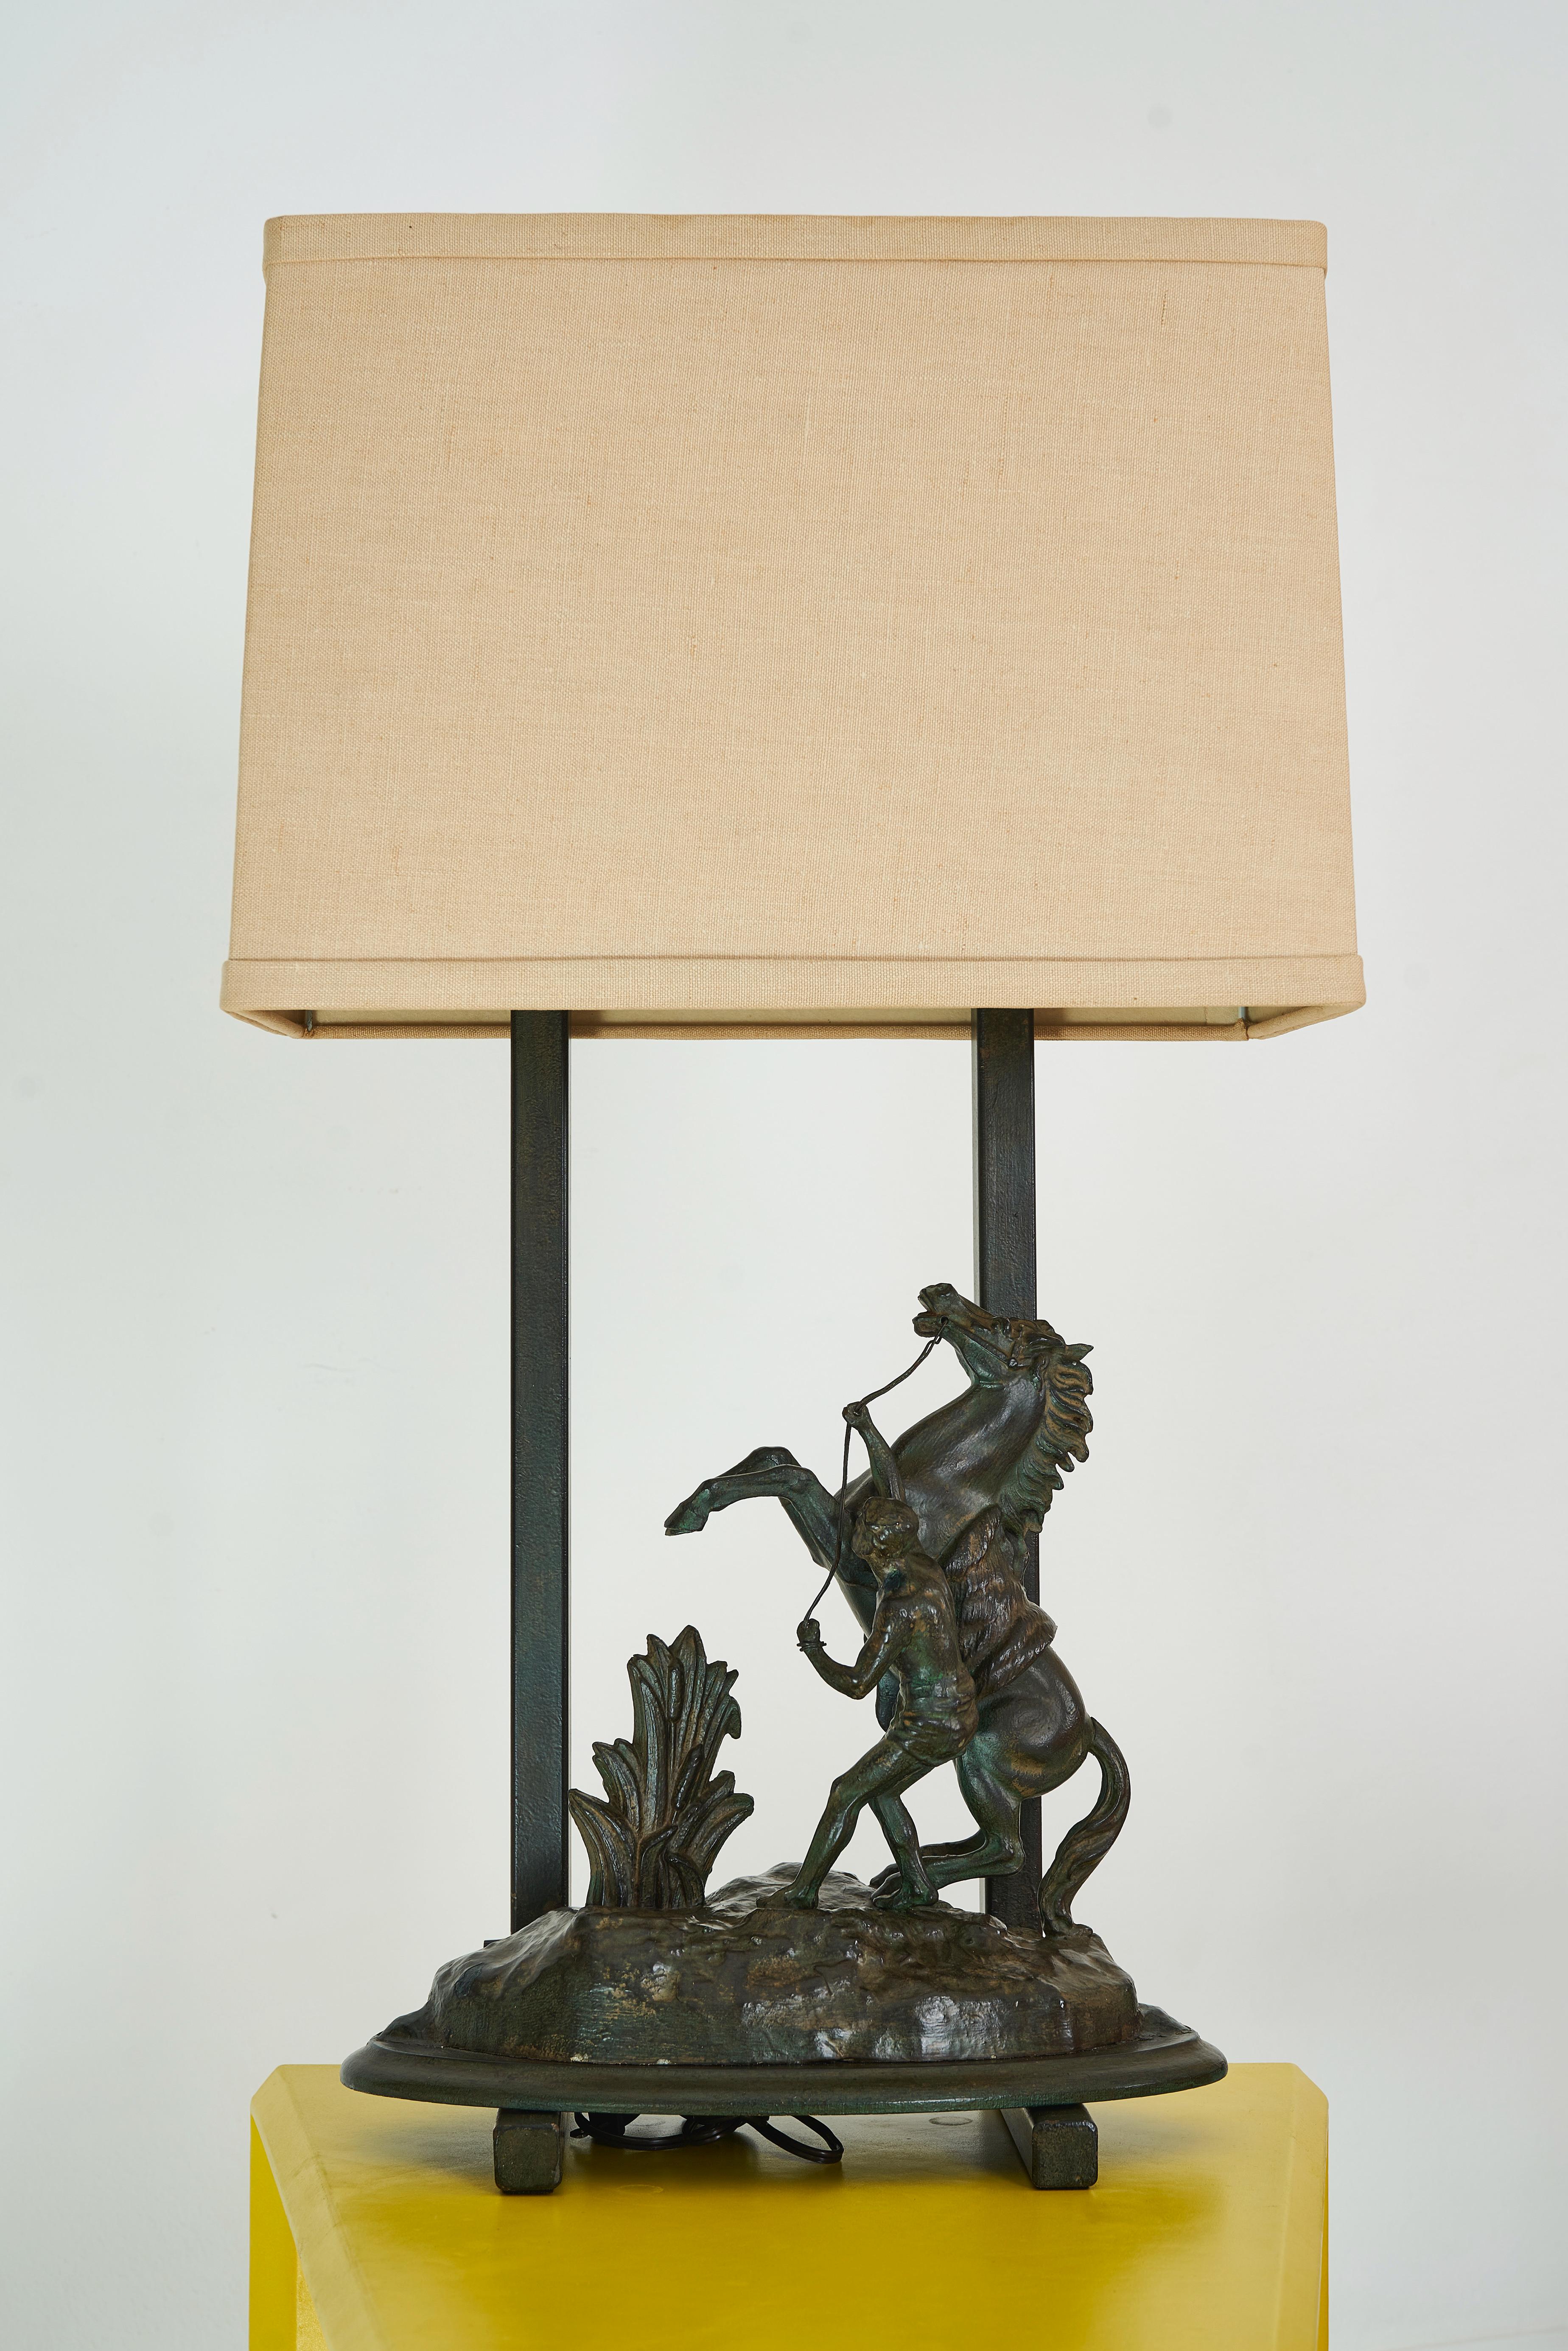 Hand-Painted An Armature Lamp featuring a Rearing Horse designed by William Haines